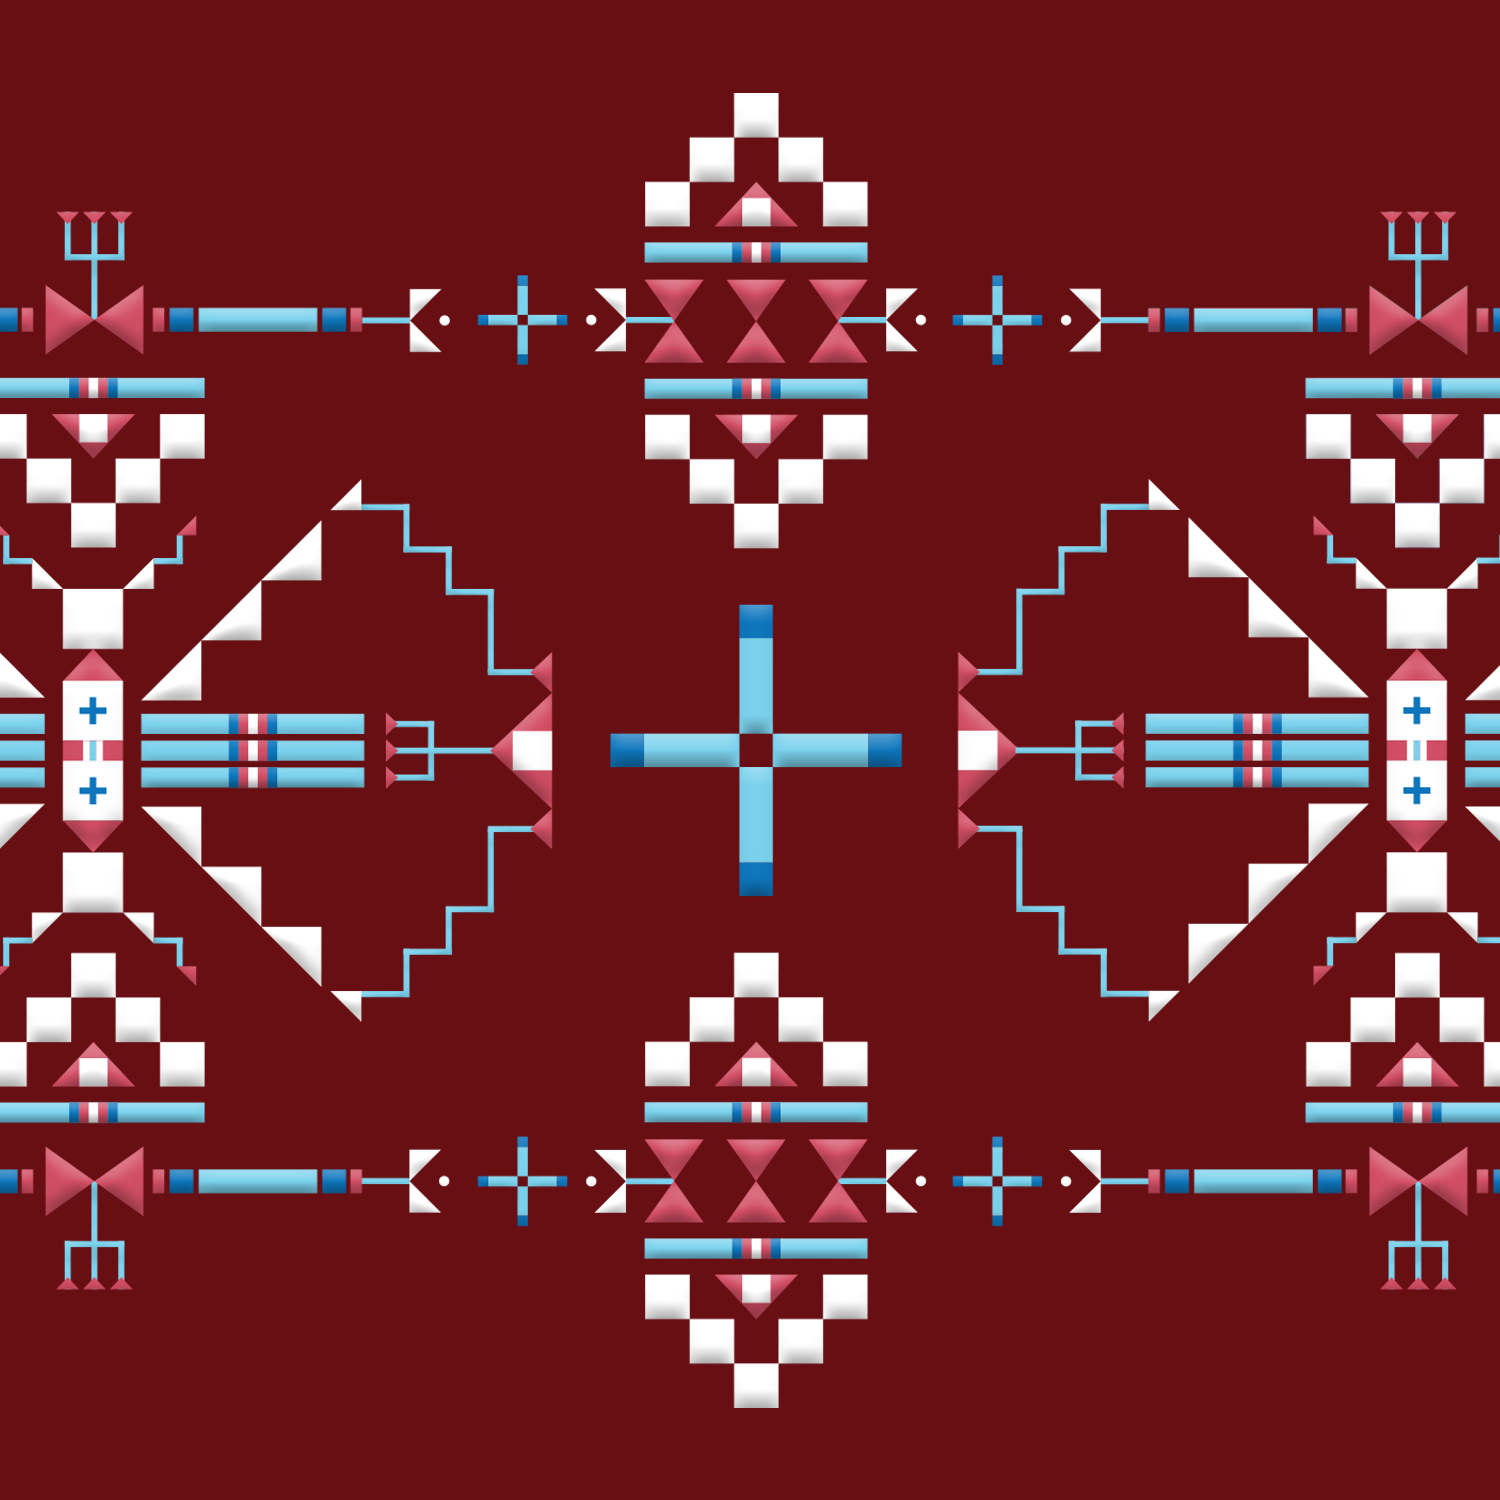 A digital image of a maroon, blue, and white design pattern